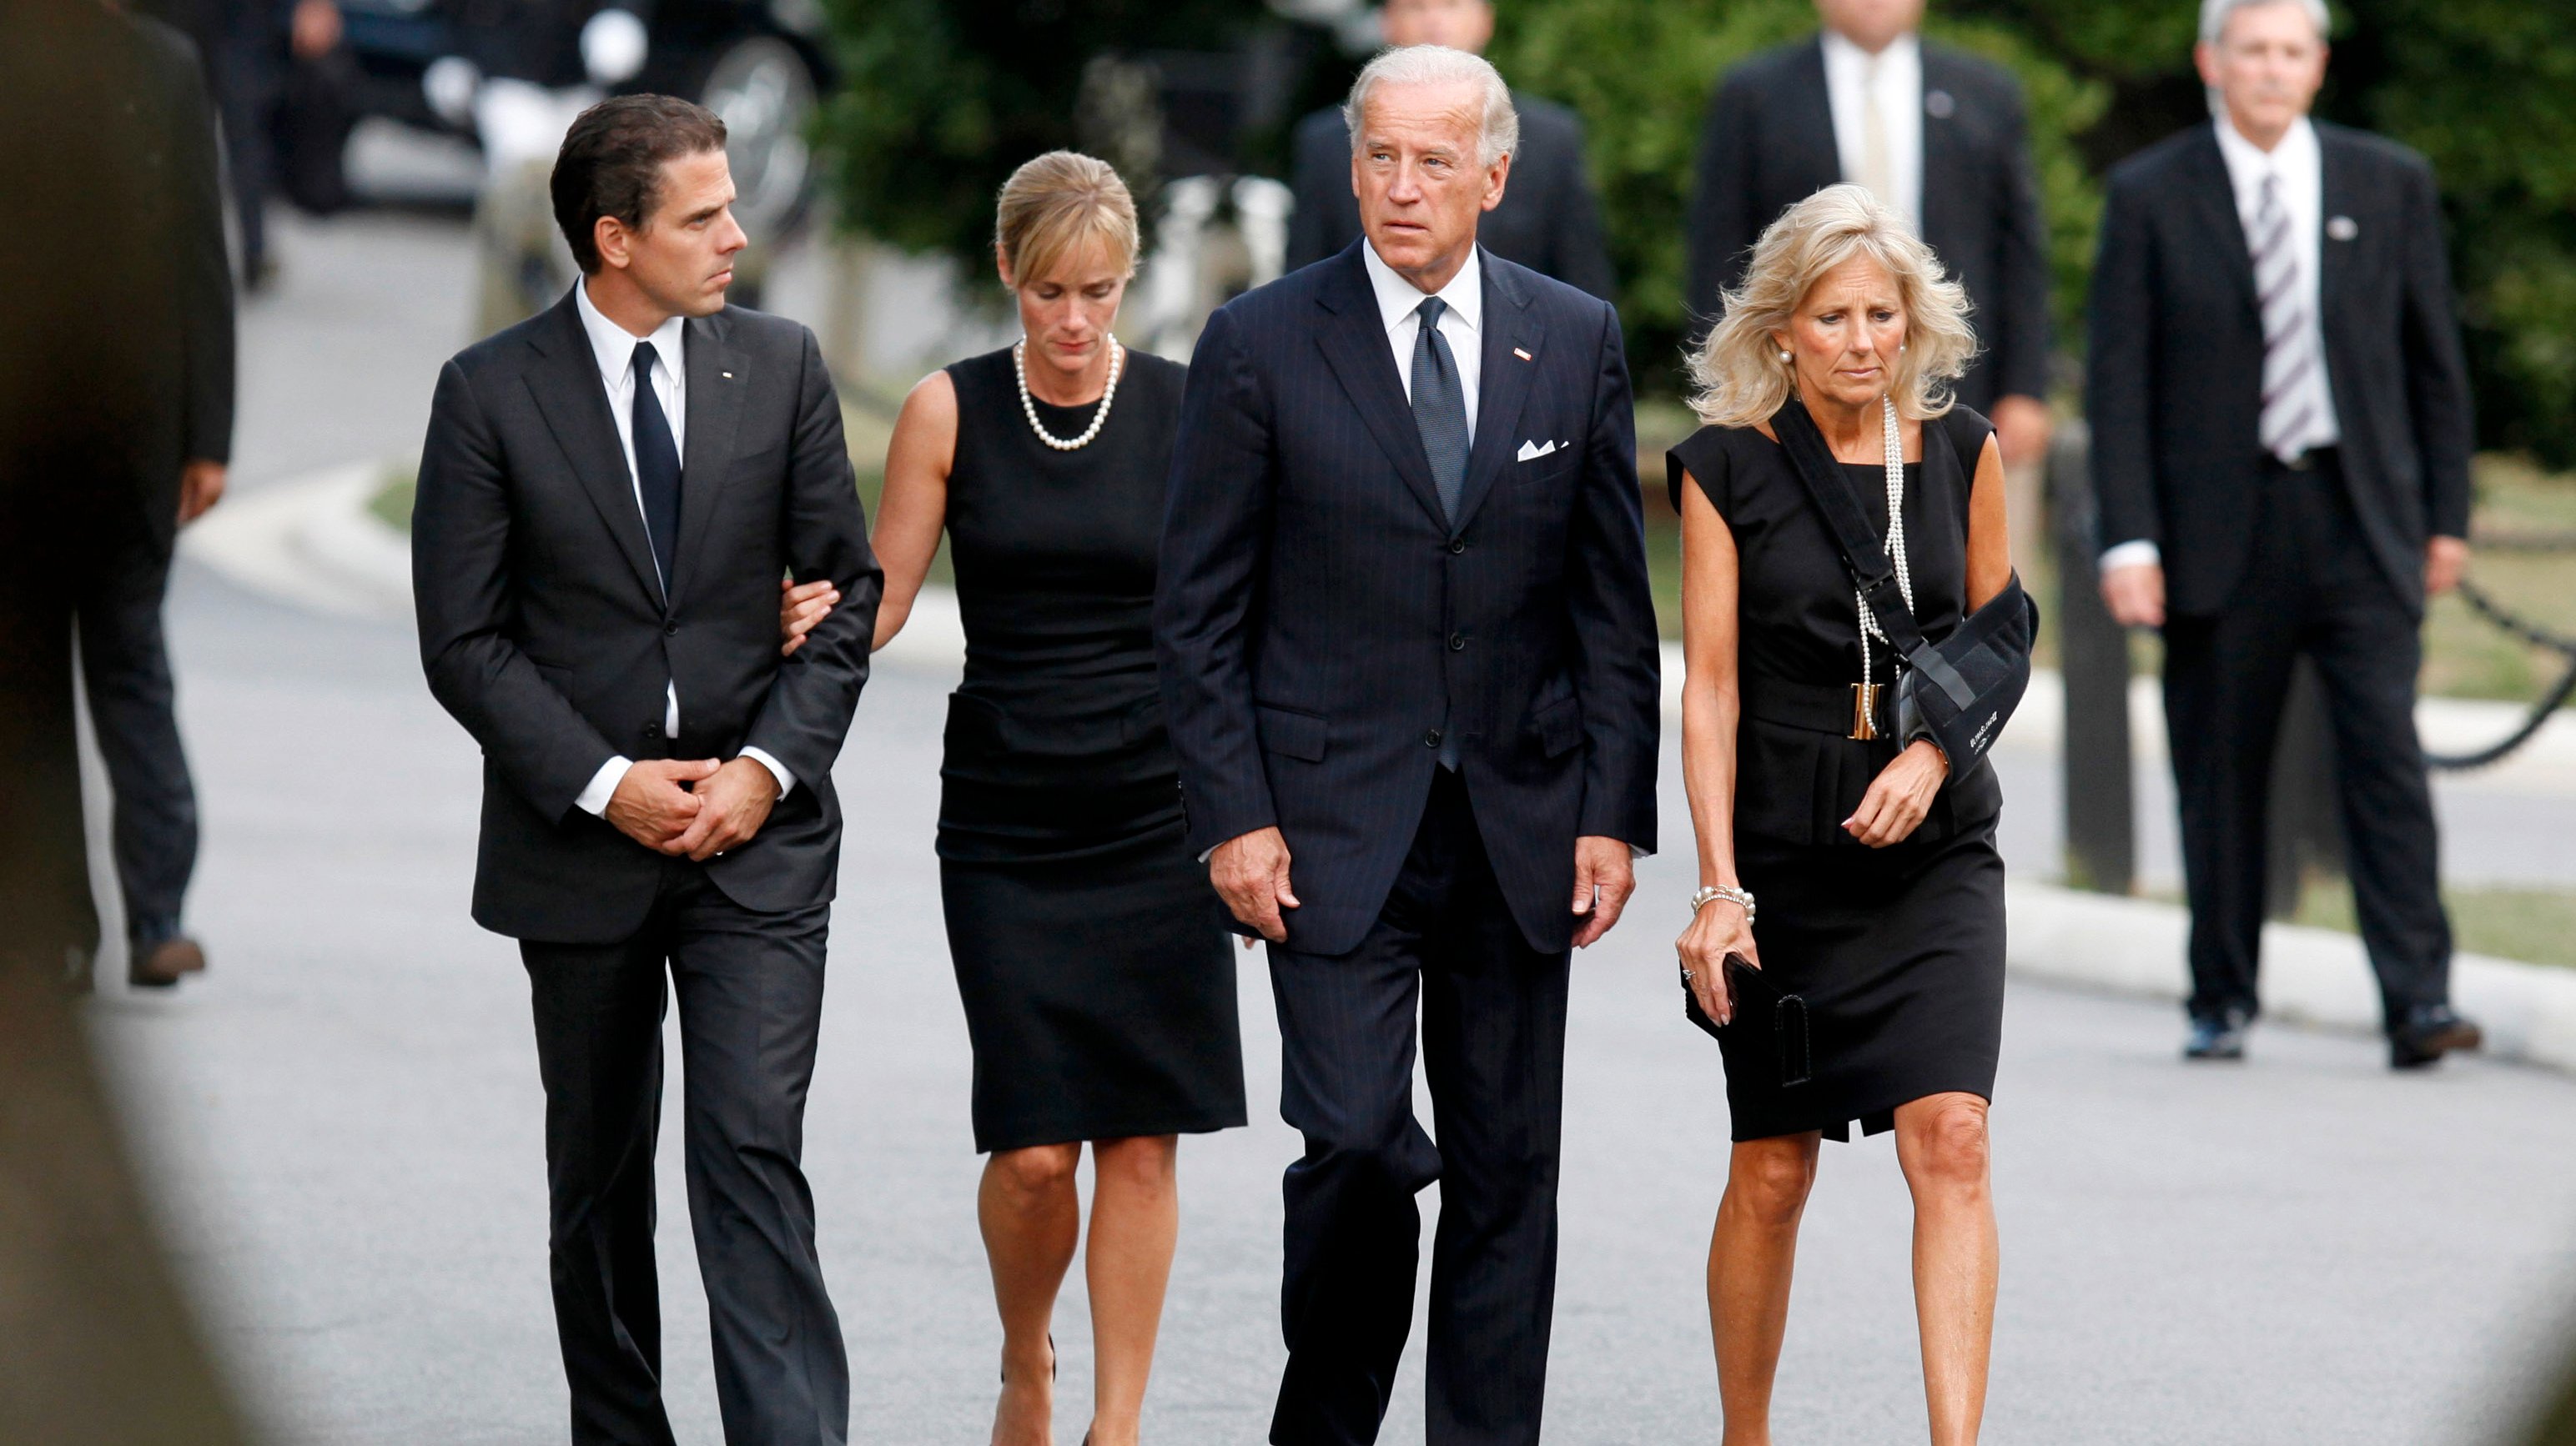 Ted Kennedy Makes Final Trip To Washington For Burial At Arlington Cemetery